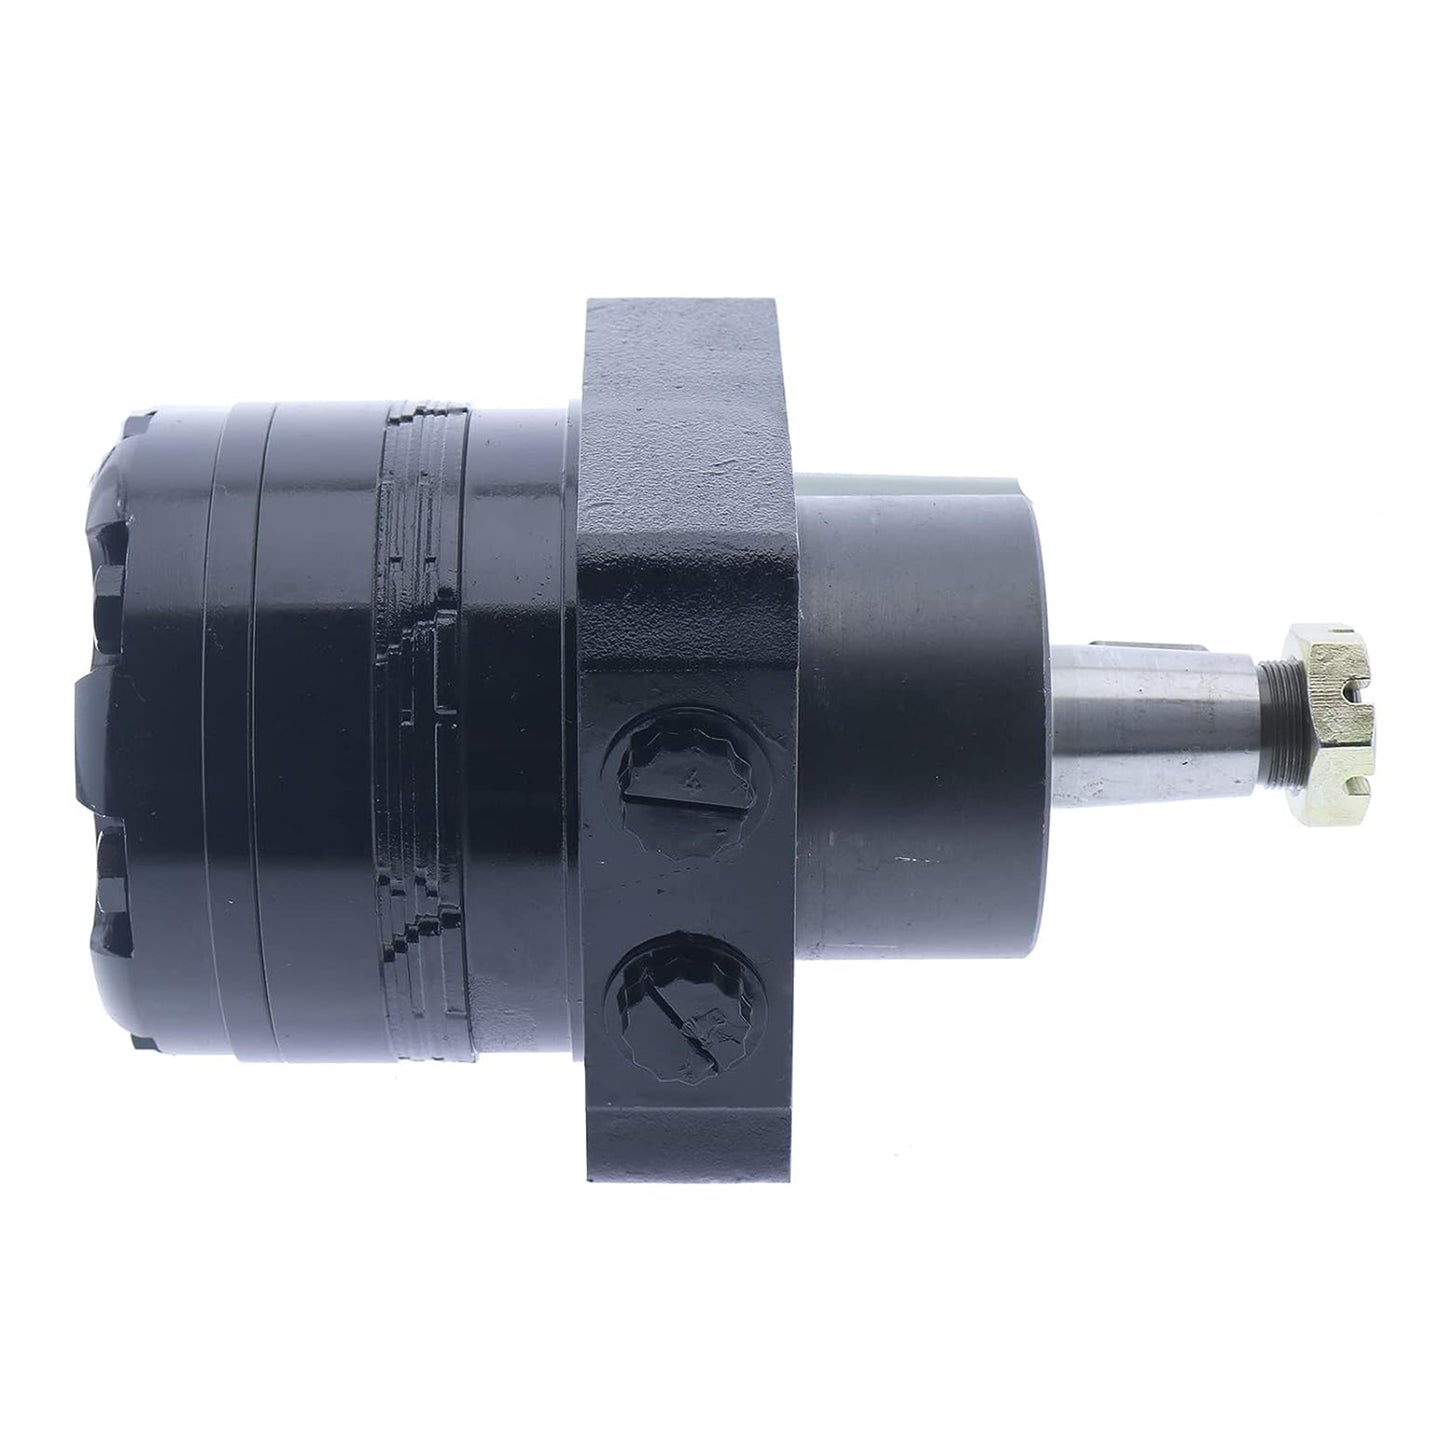 Wheel Motor Compatible With Hydrostatic Gear HGM-15E-3138 Stens 025-507 Parker Scag 482639